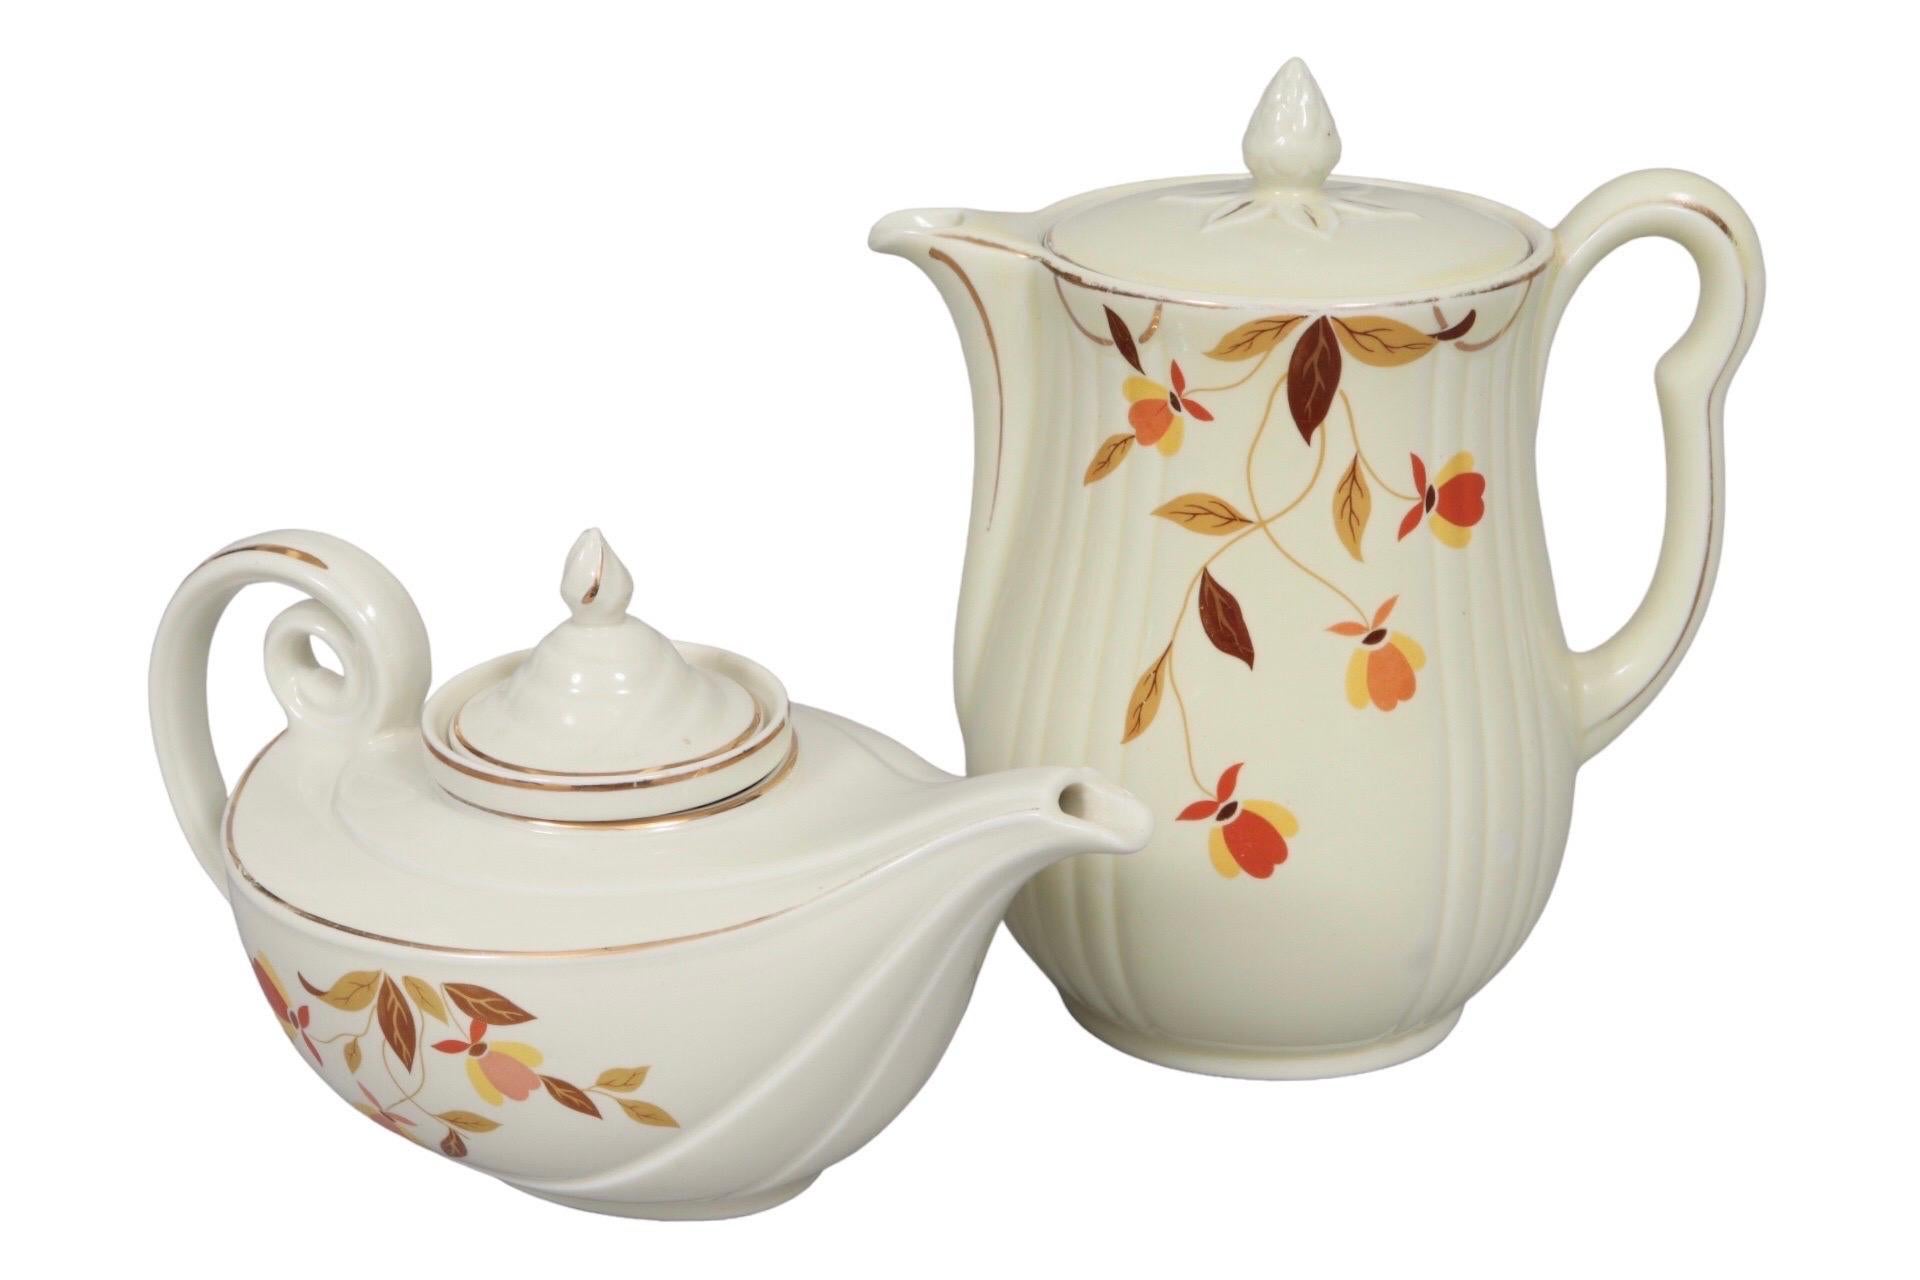 A ceramic tea and coffee pot set in the Autumn Leaf pattern by Hall's. This pattern was produced exclusively for Jewel Tea Company and was discontinued in 1976. Teapot measures 11